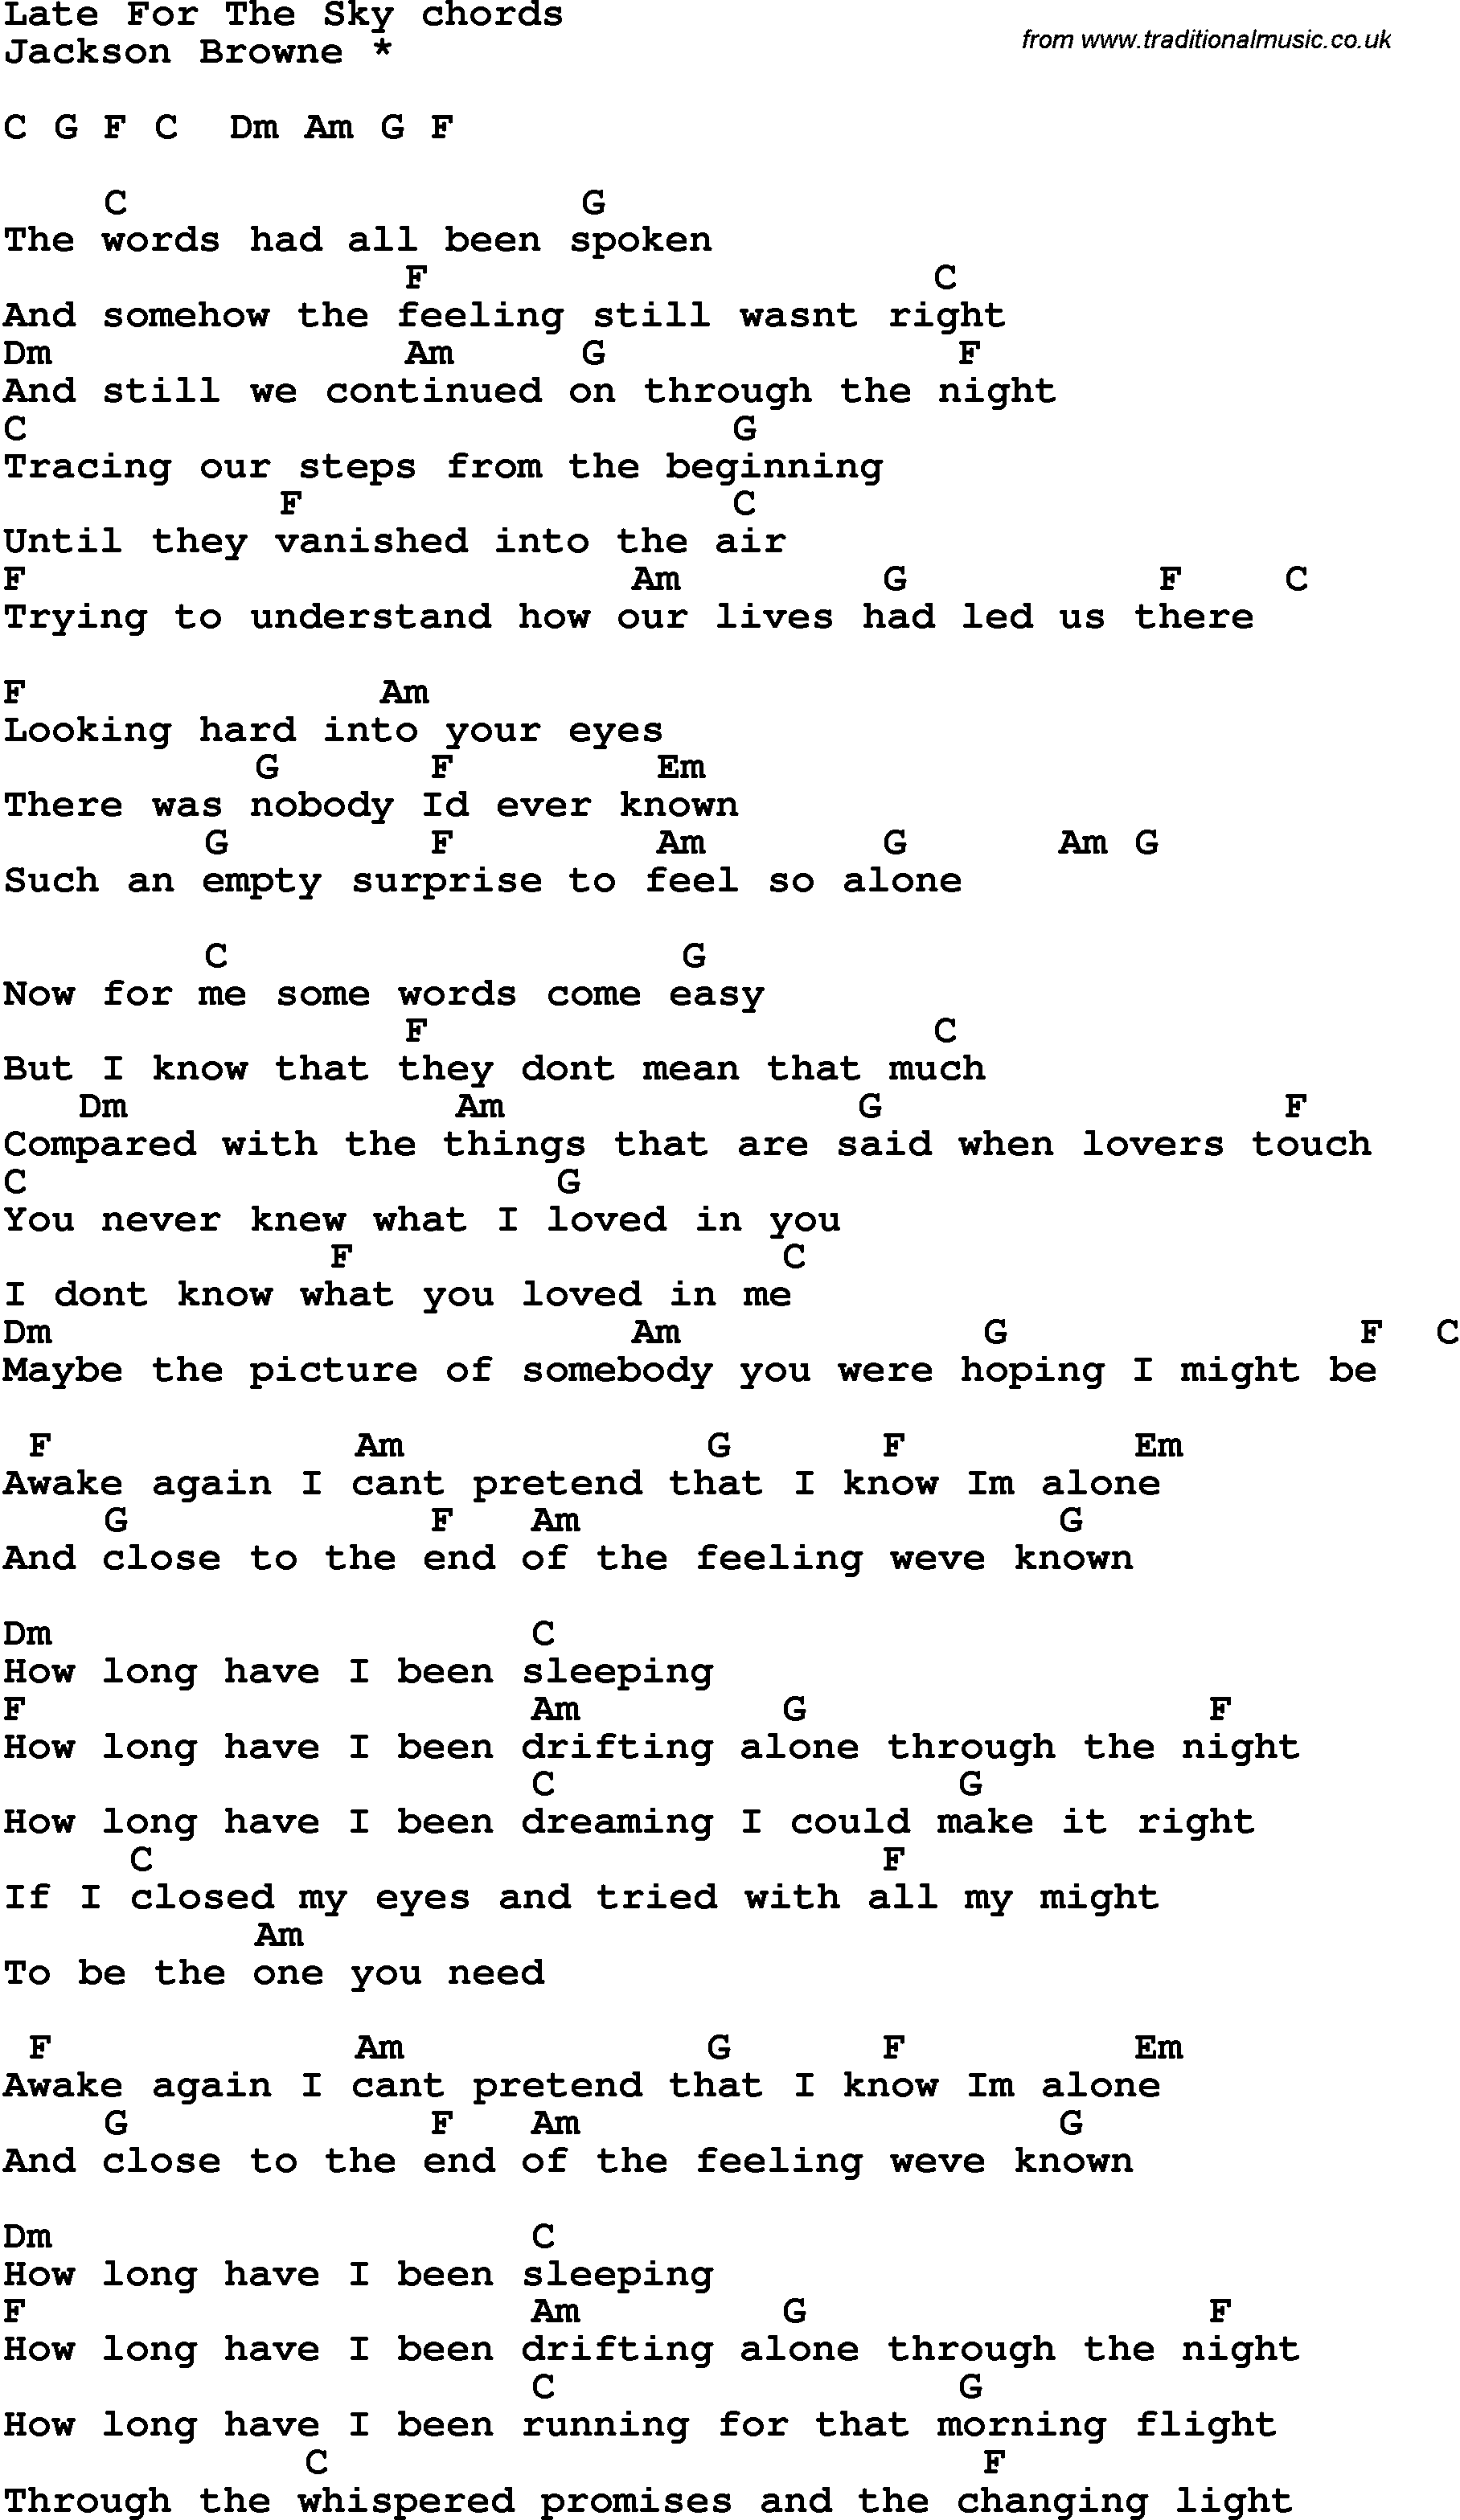 Song Lyrics with guitar chords for Late For The Sky